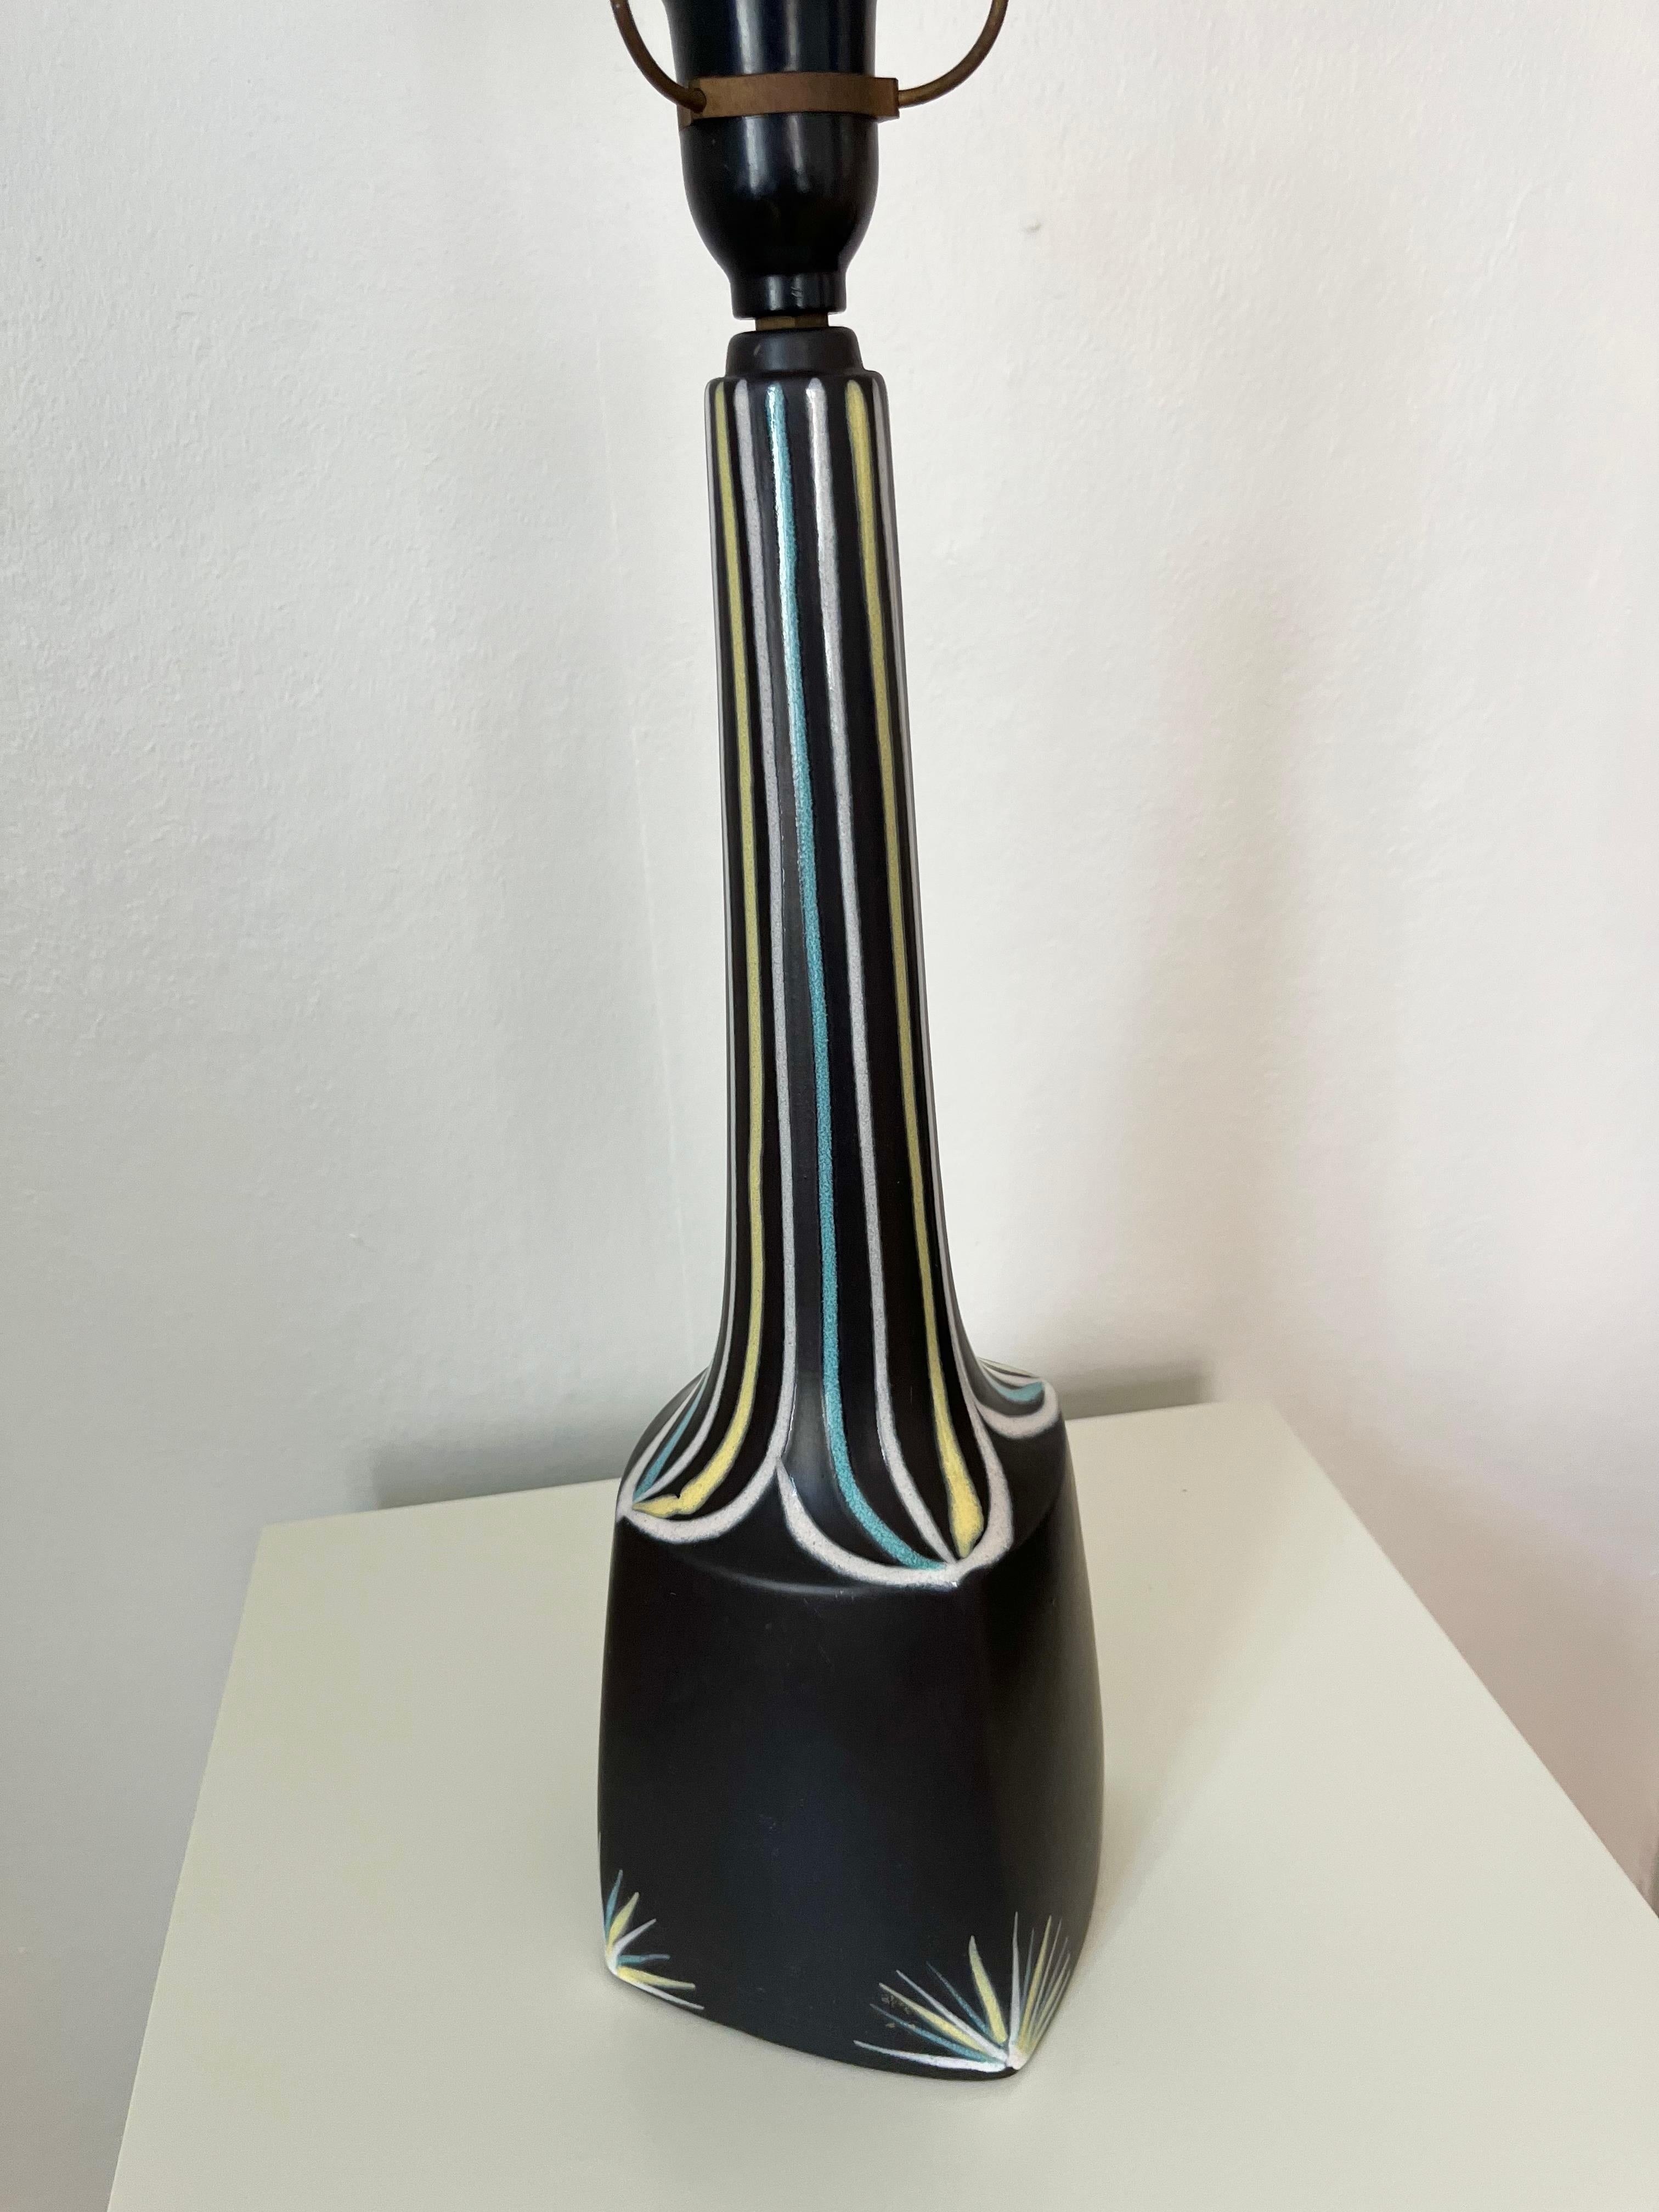 1960s tall Danish ceramics table lamp by Svend Aage Holm-Sørensen for Søholm In Good Condition For Sale In Frederiksberg C, DK